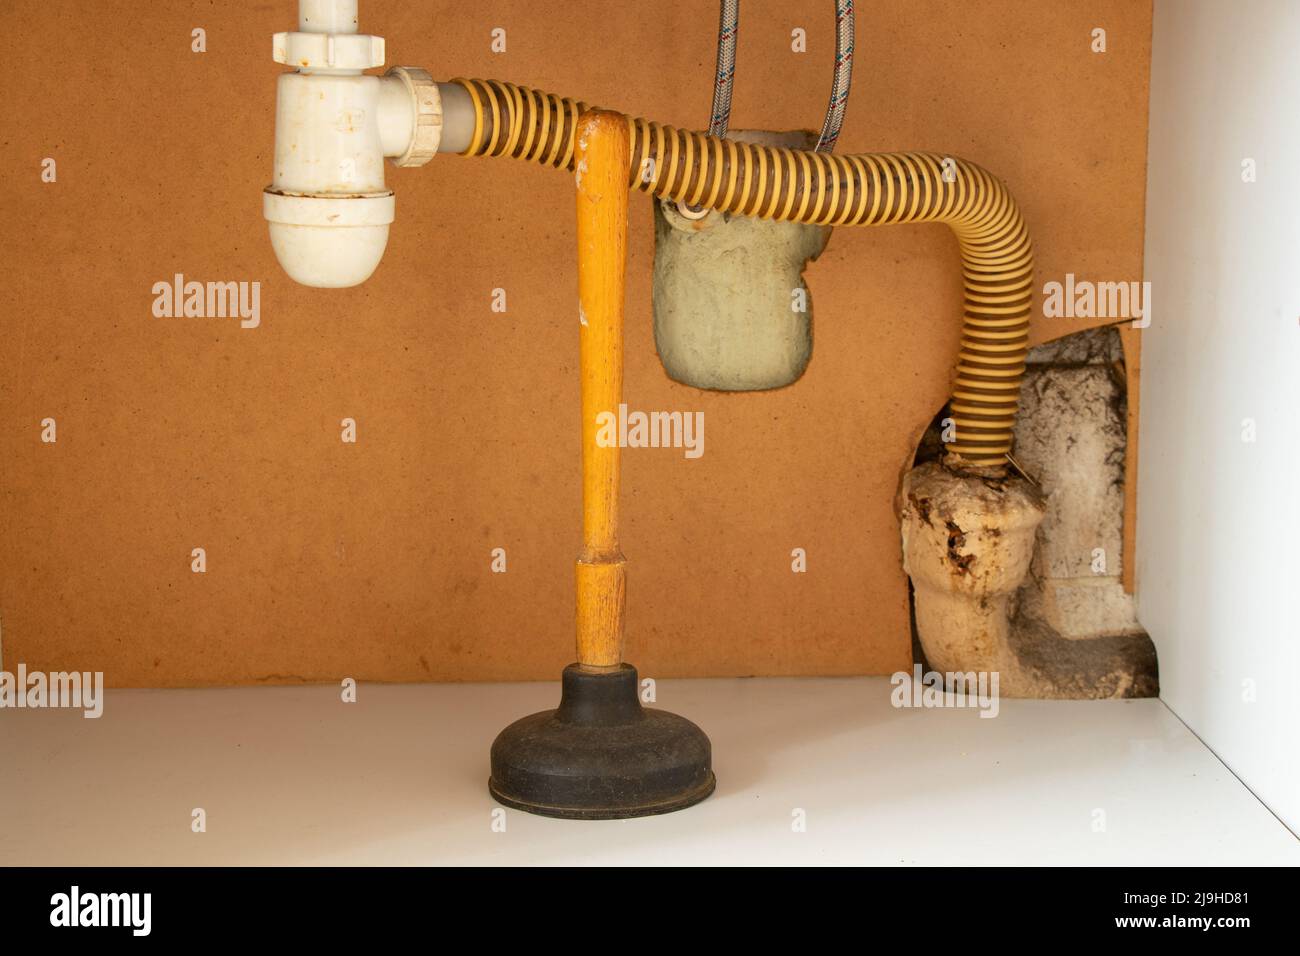 A plunger stands in a cupboard under the sink in the kitchen, cleaning clogged pipes, an old pipe cleaner Stock Photo